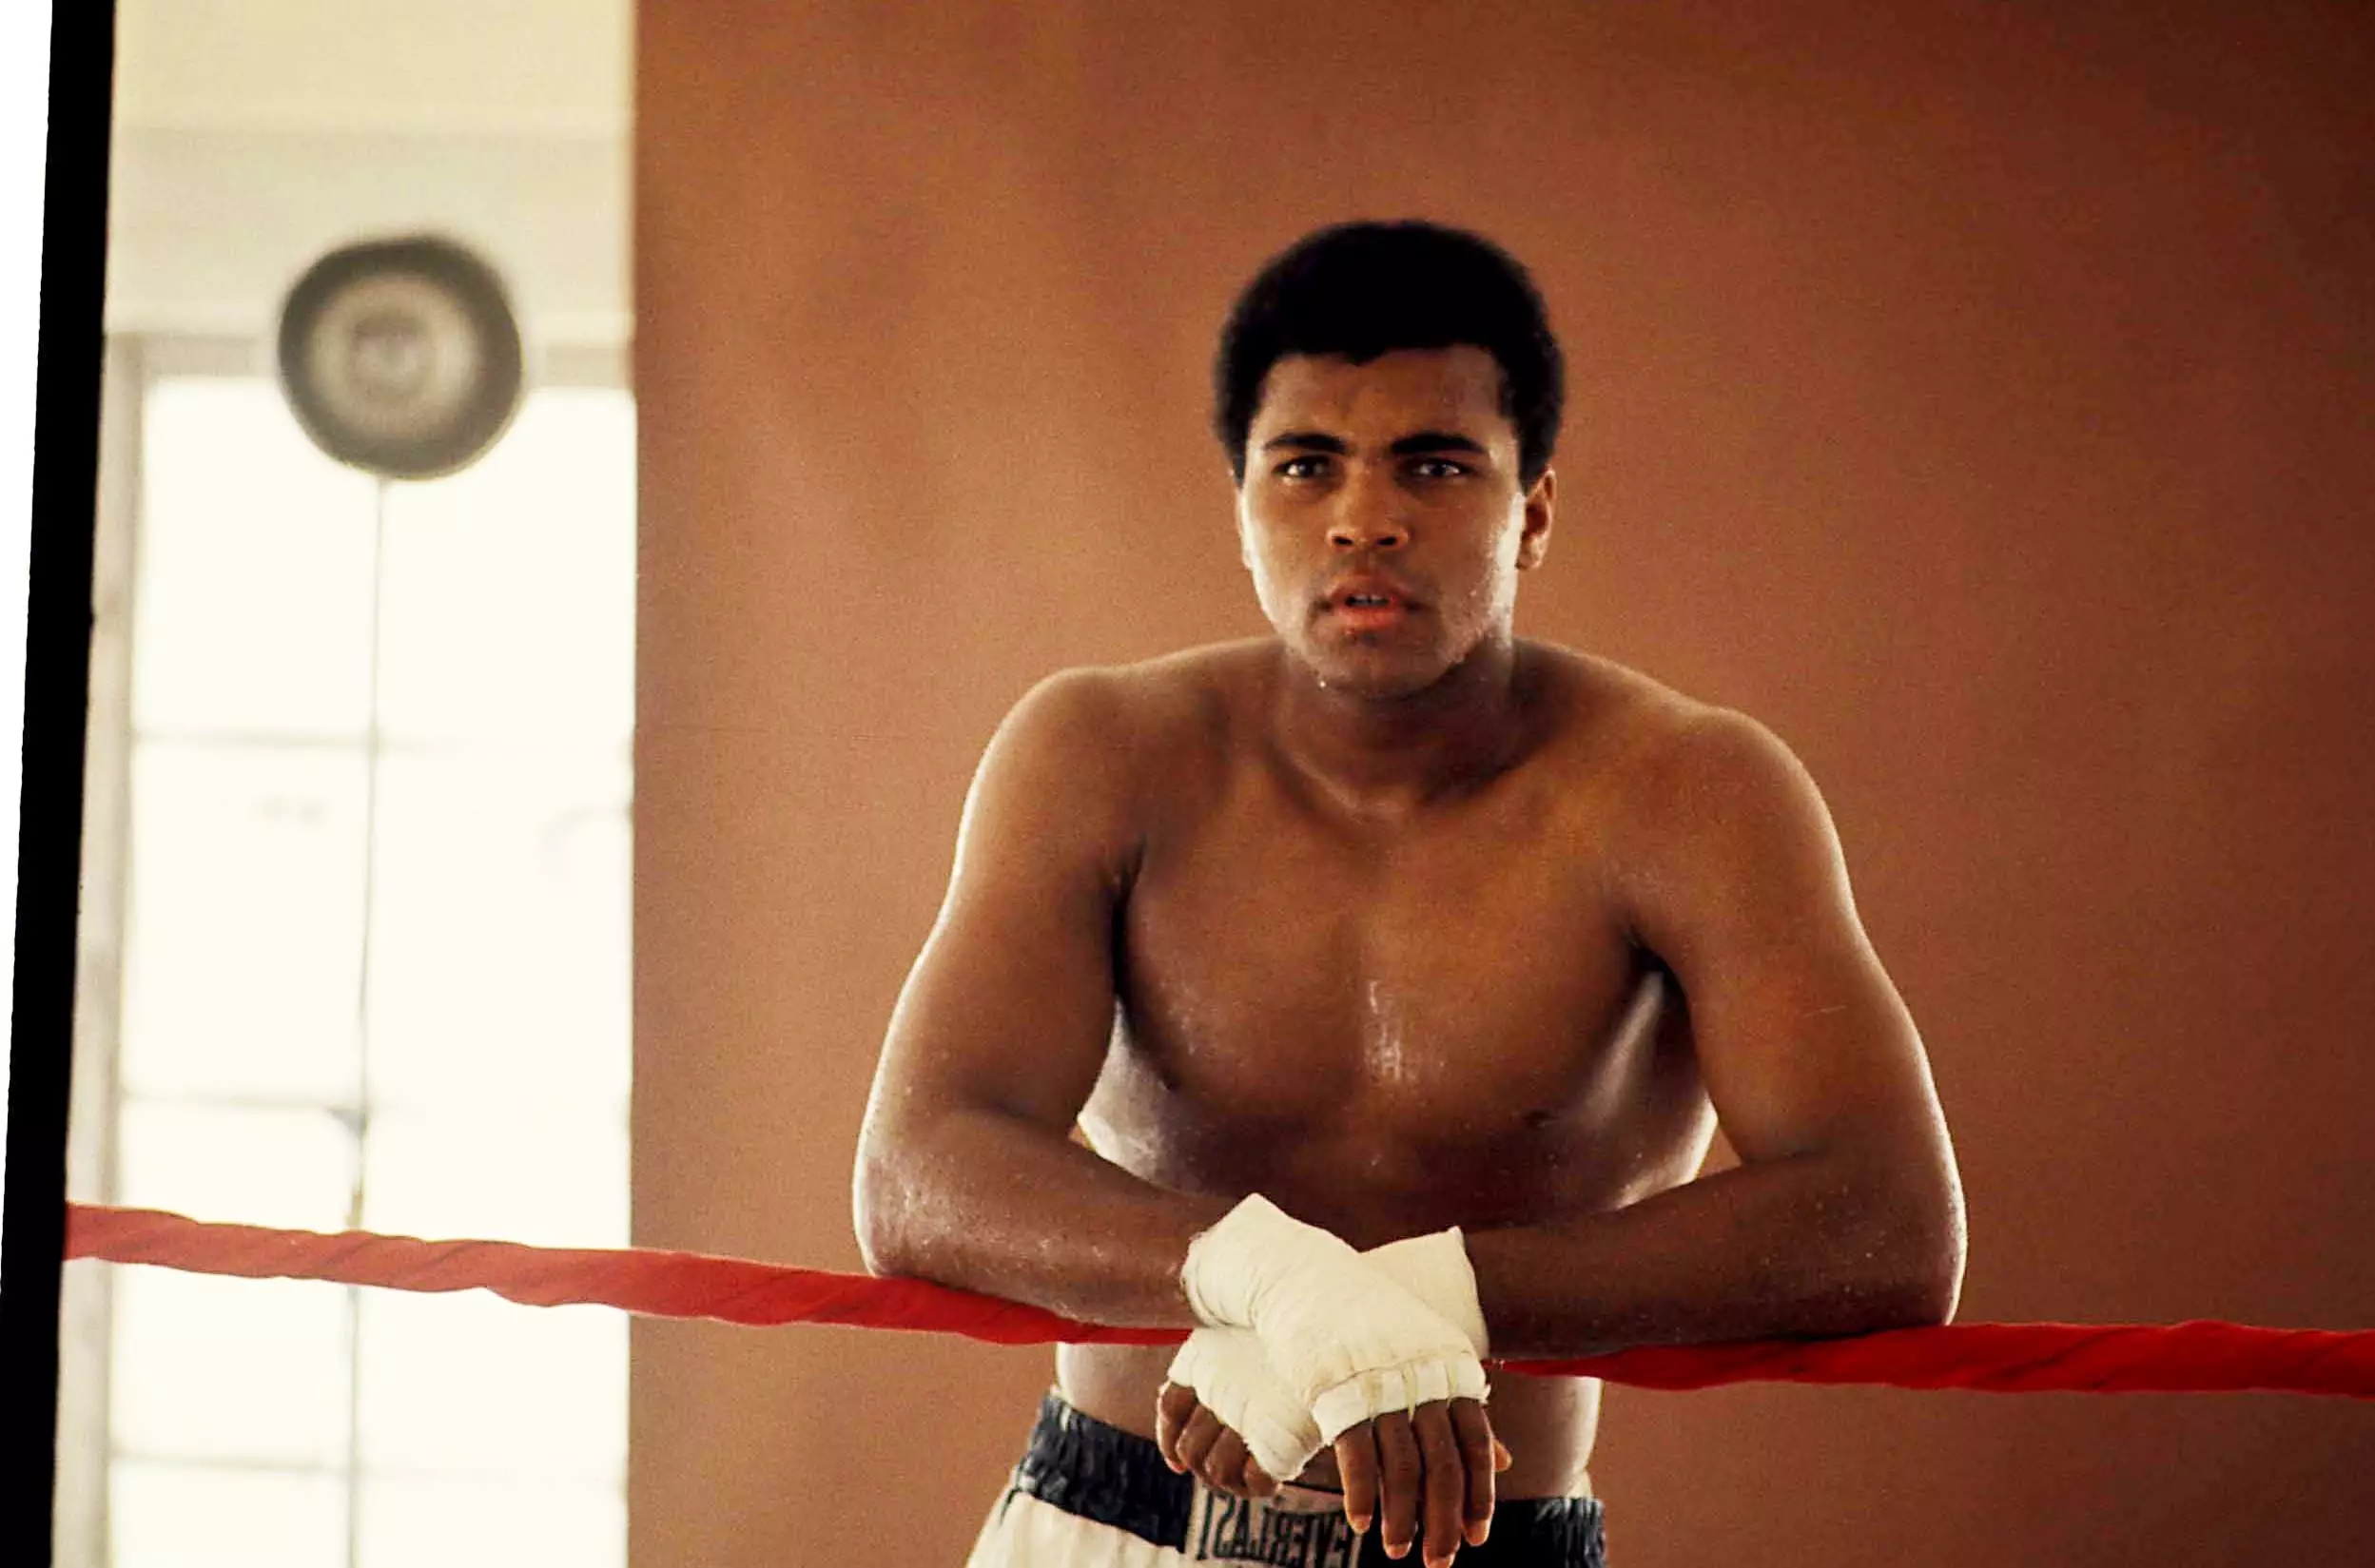 Muhammad Ali is regarded as one of the greatest sportsmen ever. (Image